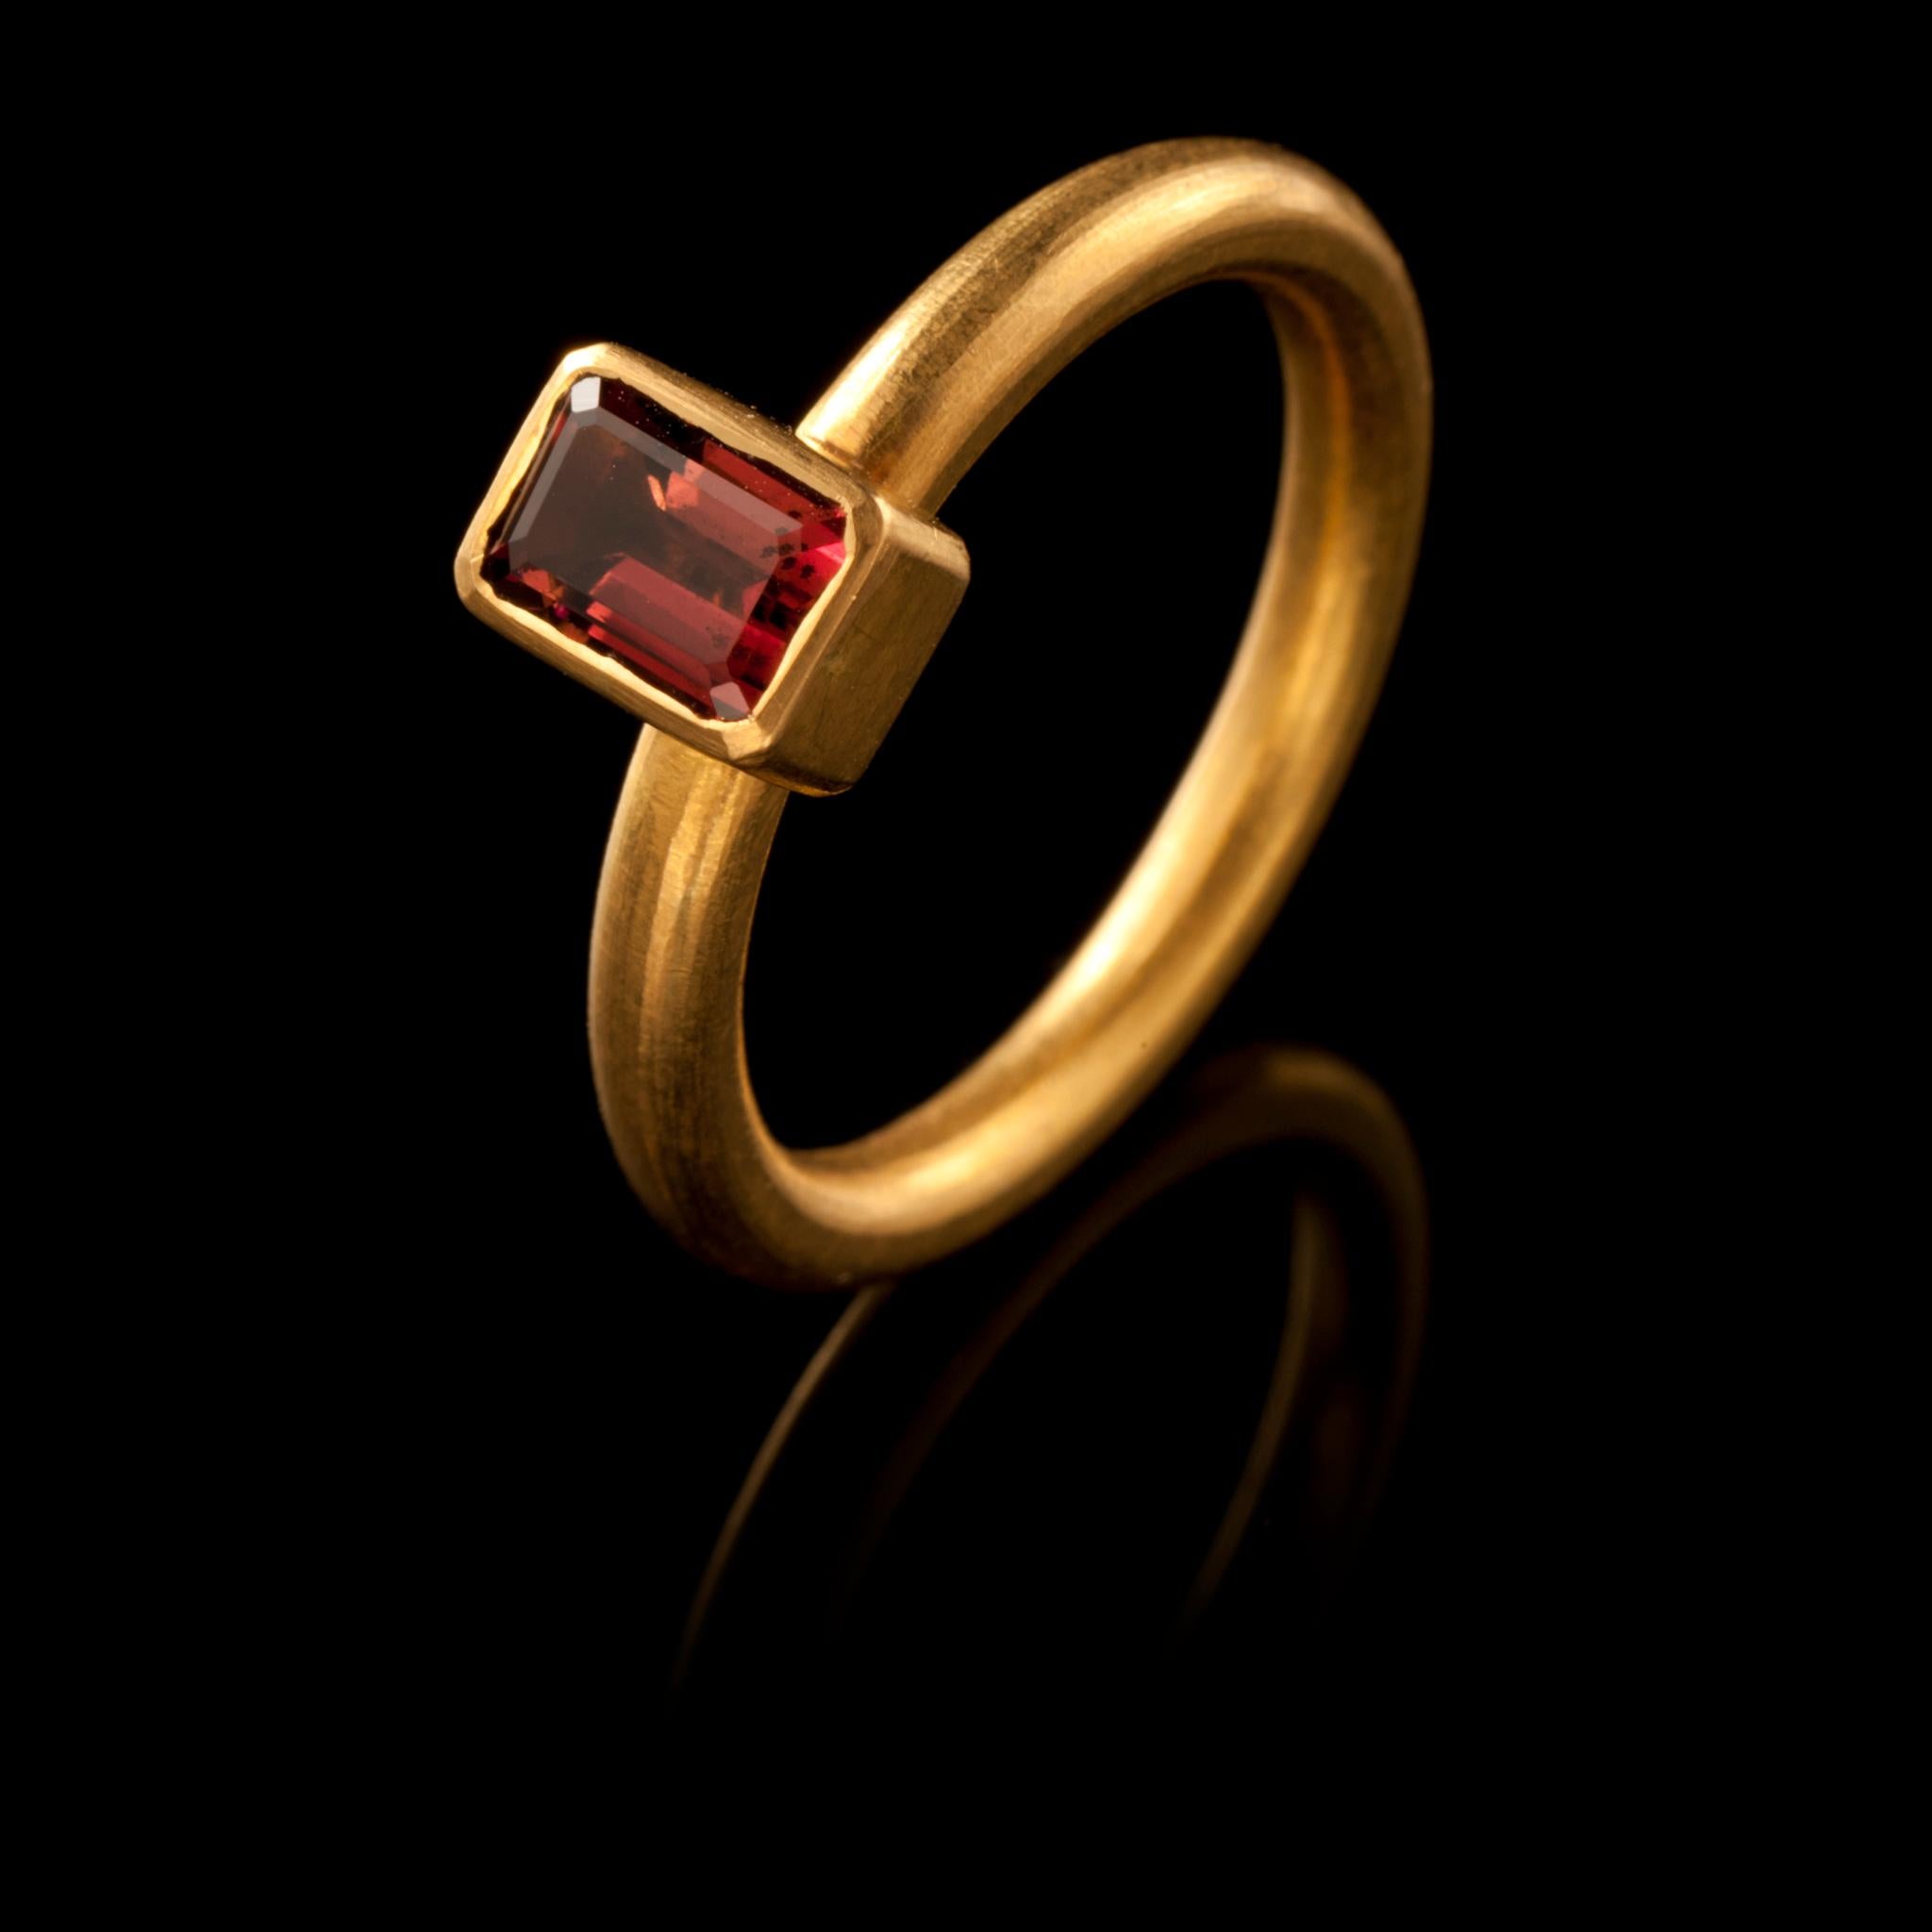 A chic, hand crafted 18 karat matte gold stacking ring with an emerald cut light brownish/pink tourmaline. Size: UK: O/P US: 7.75 Europe: 55.5 The ring can be resized. Wear it on its own or with other rings from the collection as shown on our model.